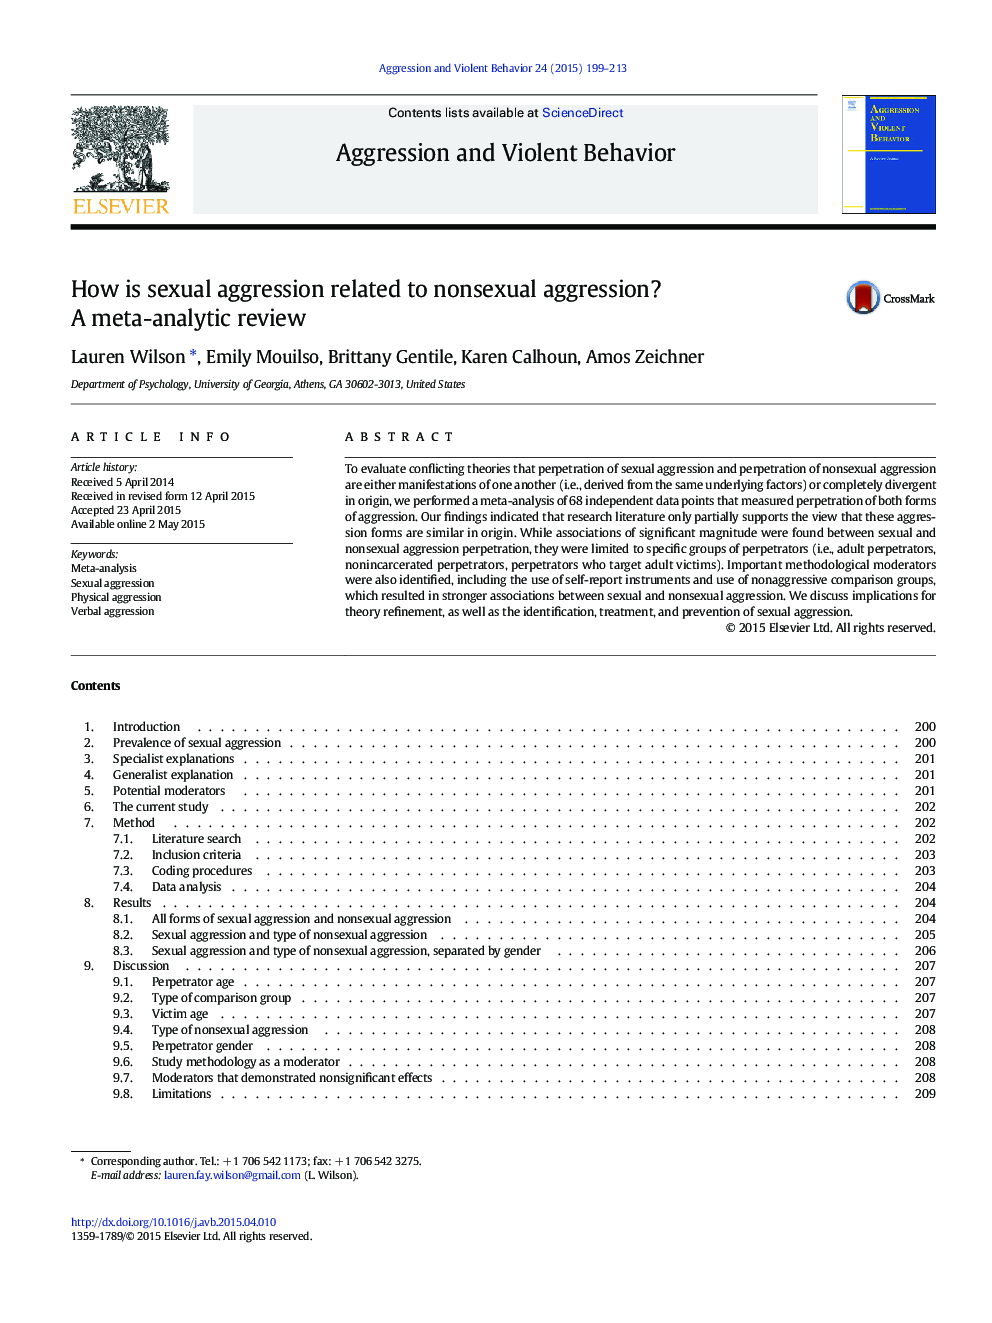 How is sexual aggression related to nonsexual aggression? A meta-analytic review